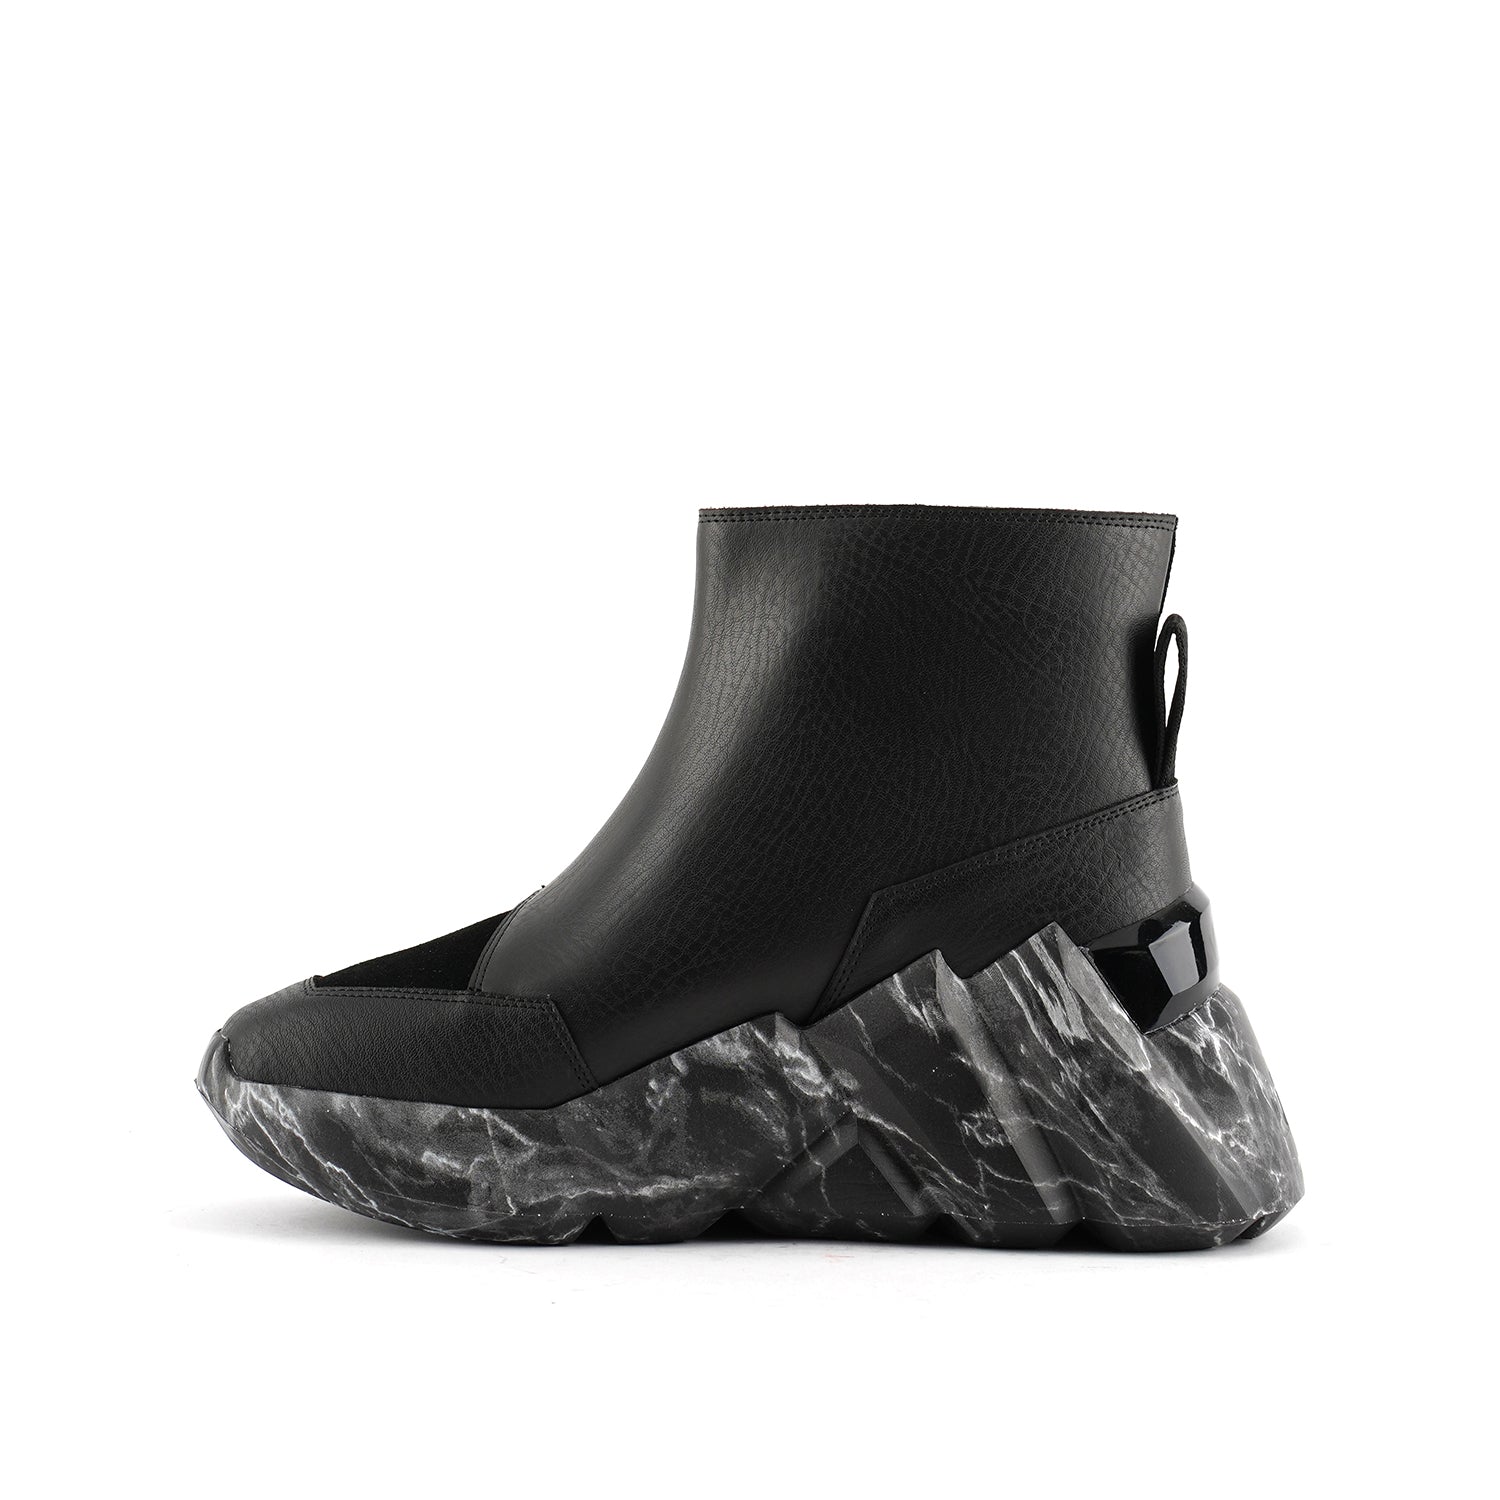 Space Kick V Boot - Black Marble – United Nude